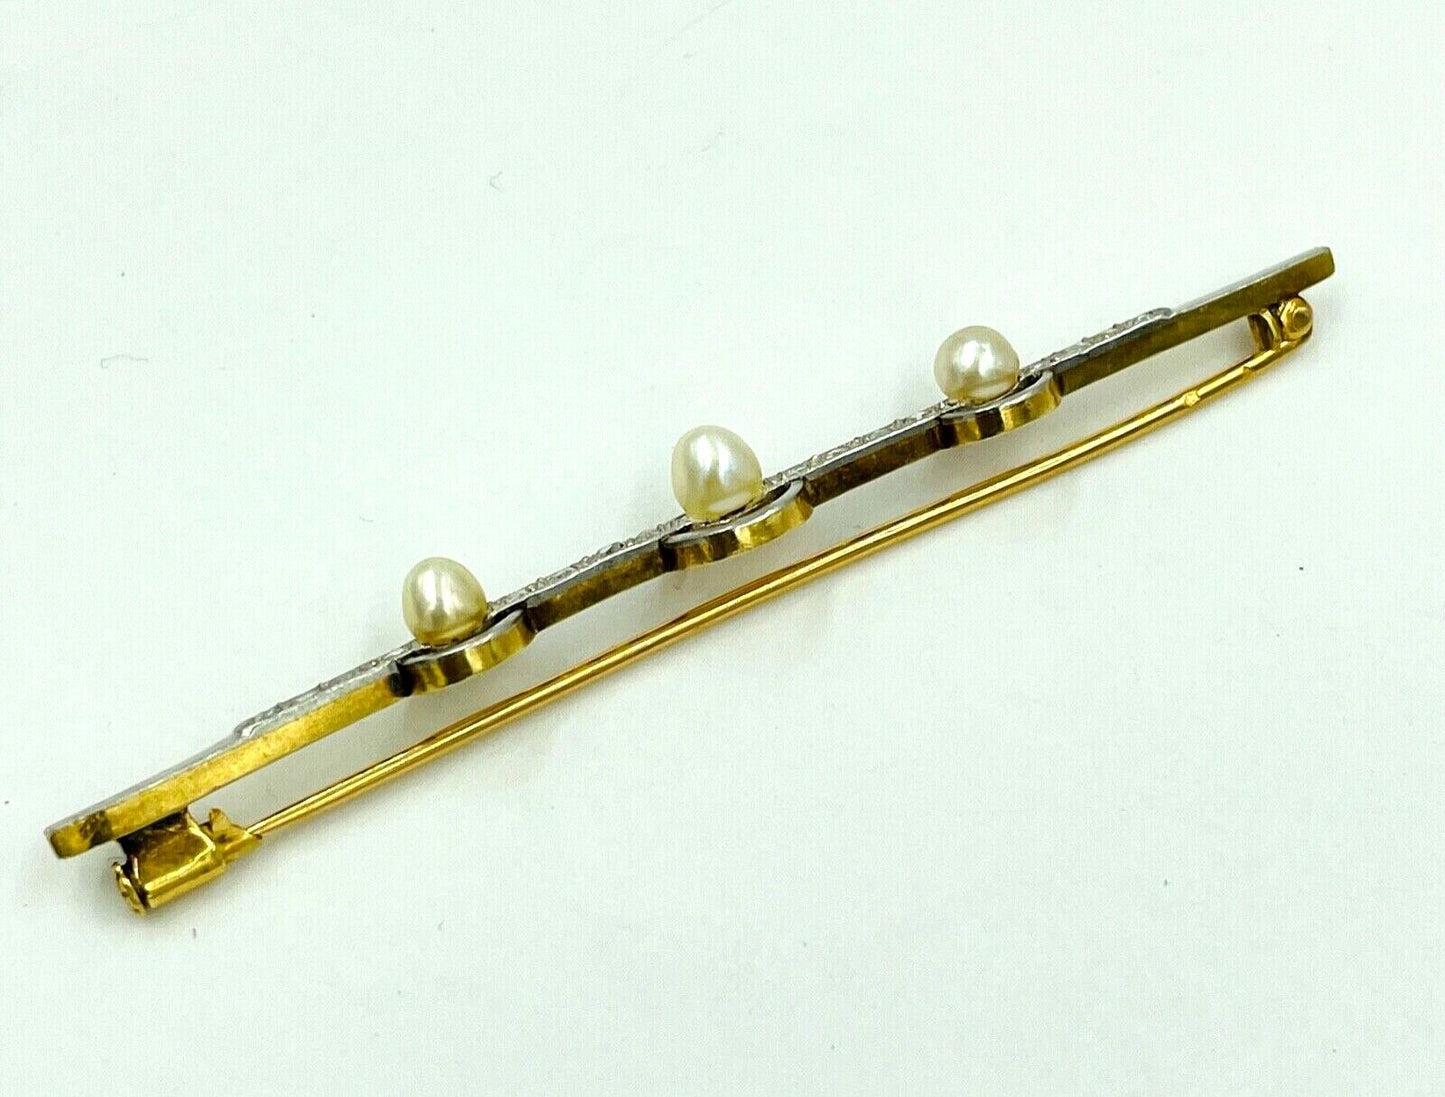 Antique French 18k and Platinum Rose Cut Diamond and Pearl brooch bar pin